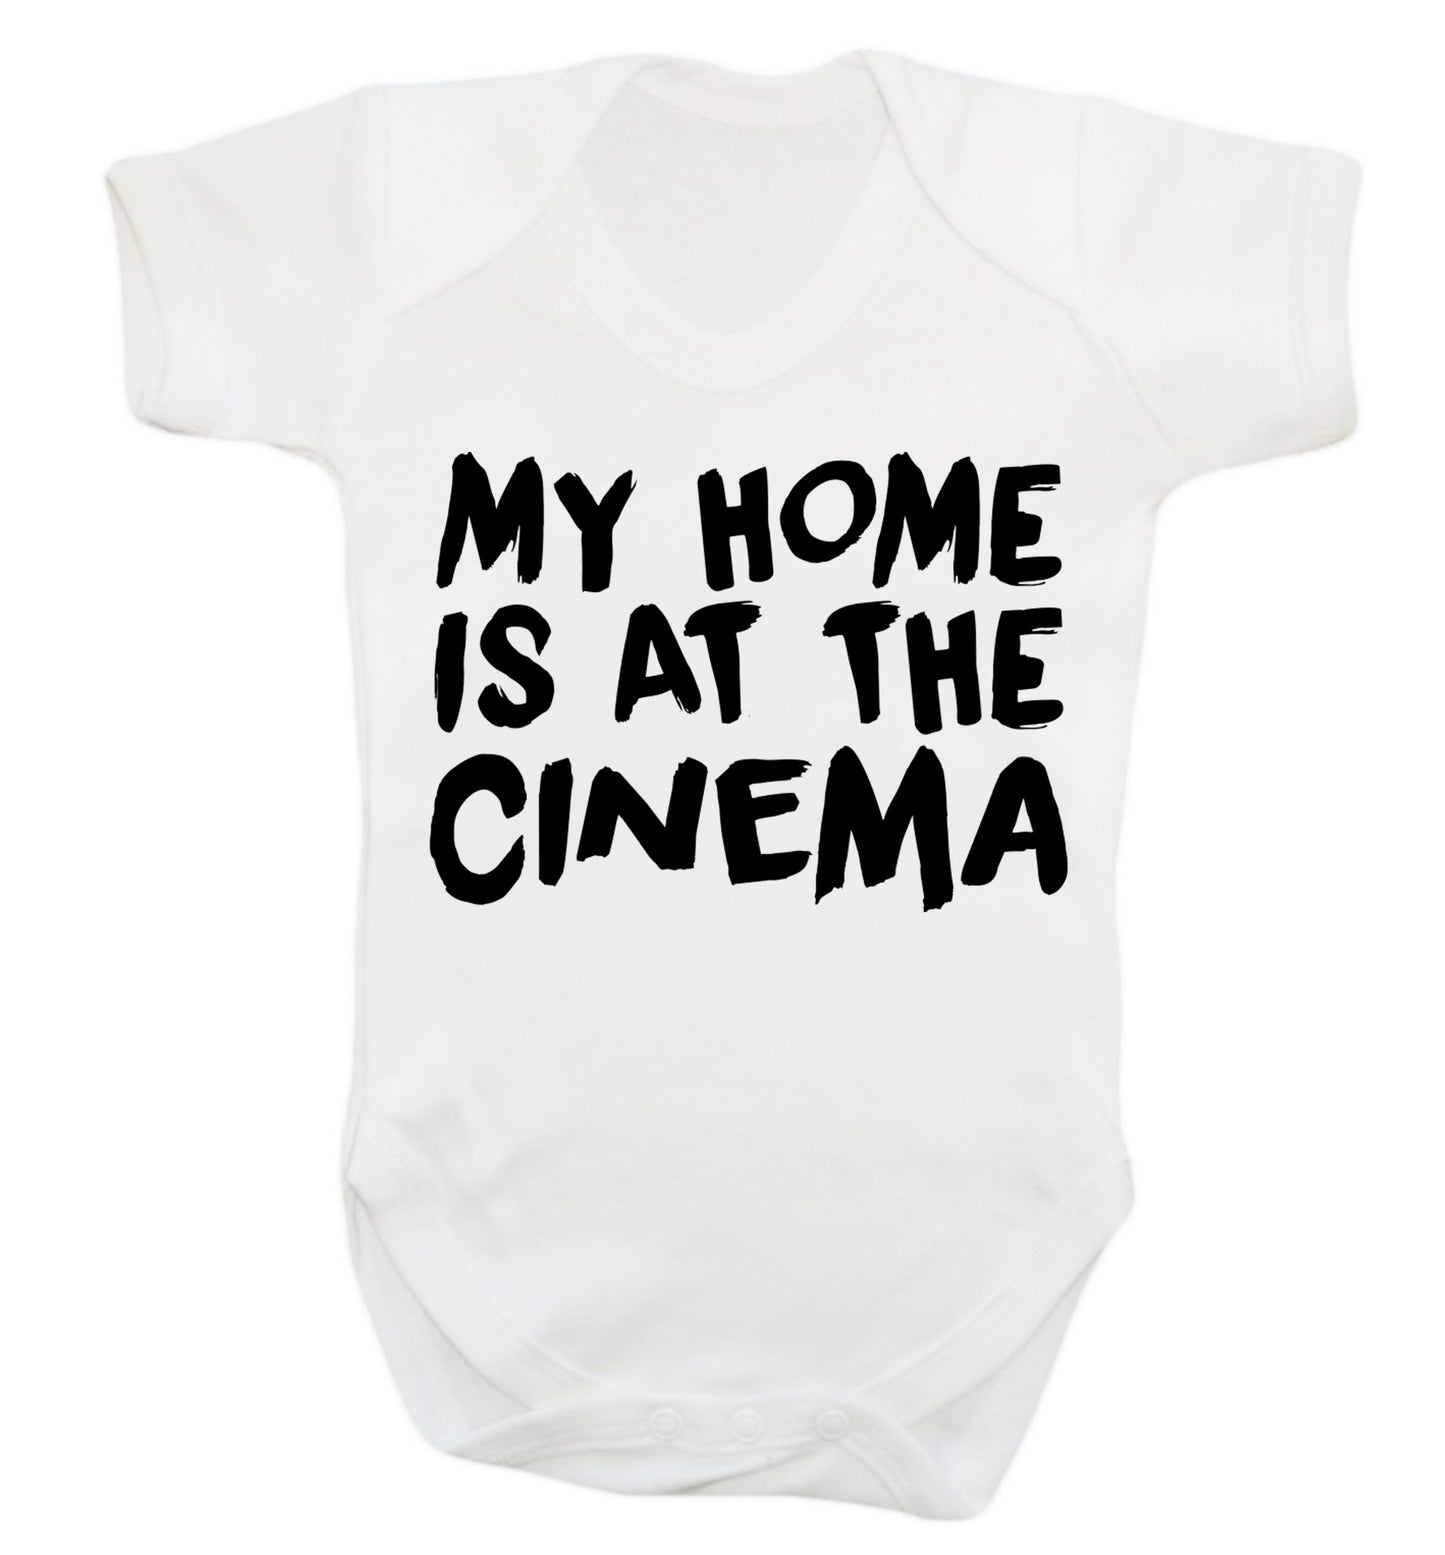 My home is at the cinema Baby Vest white 18-24 months